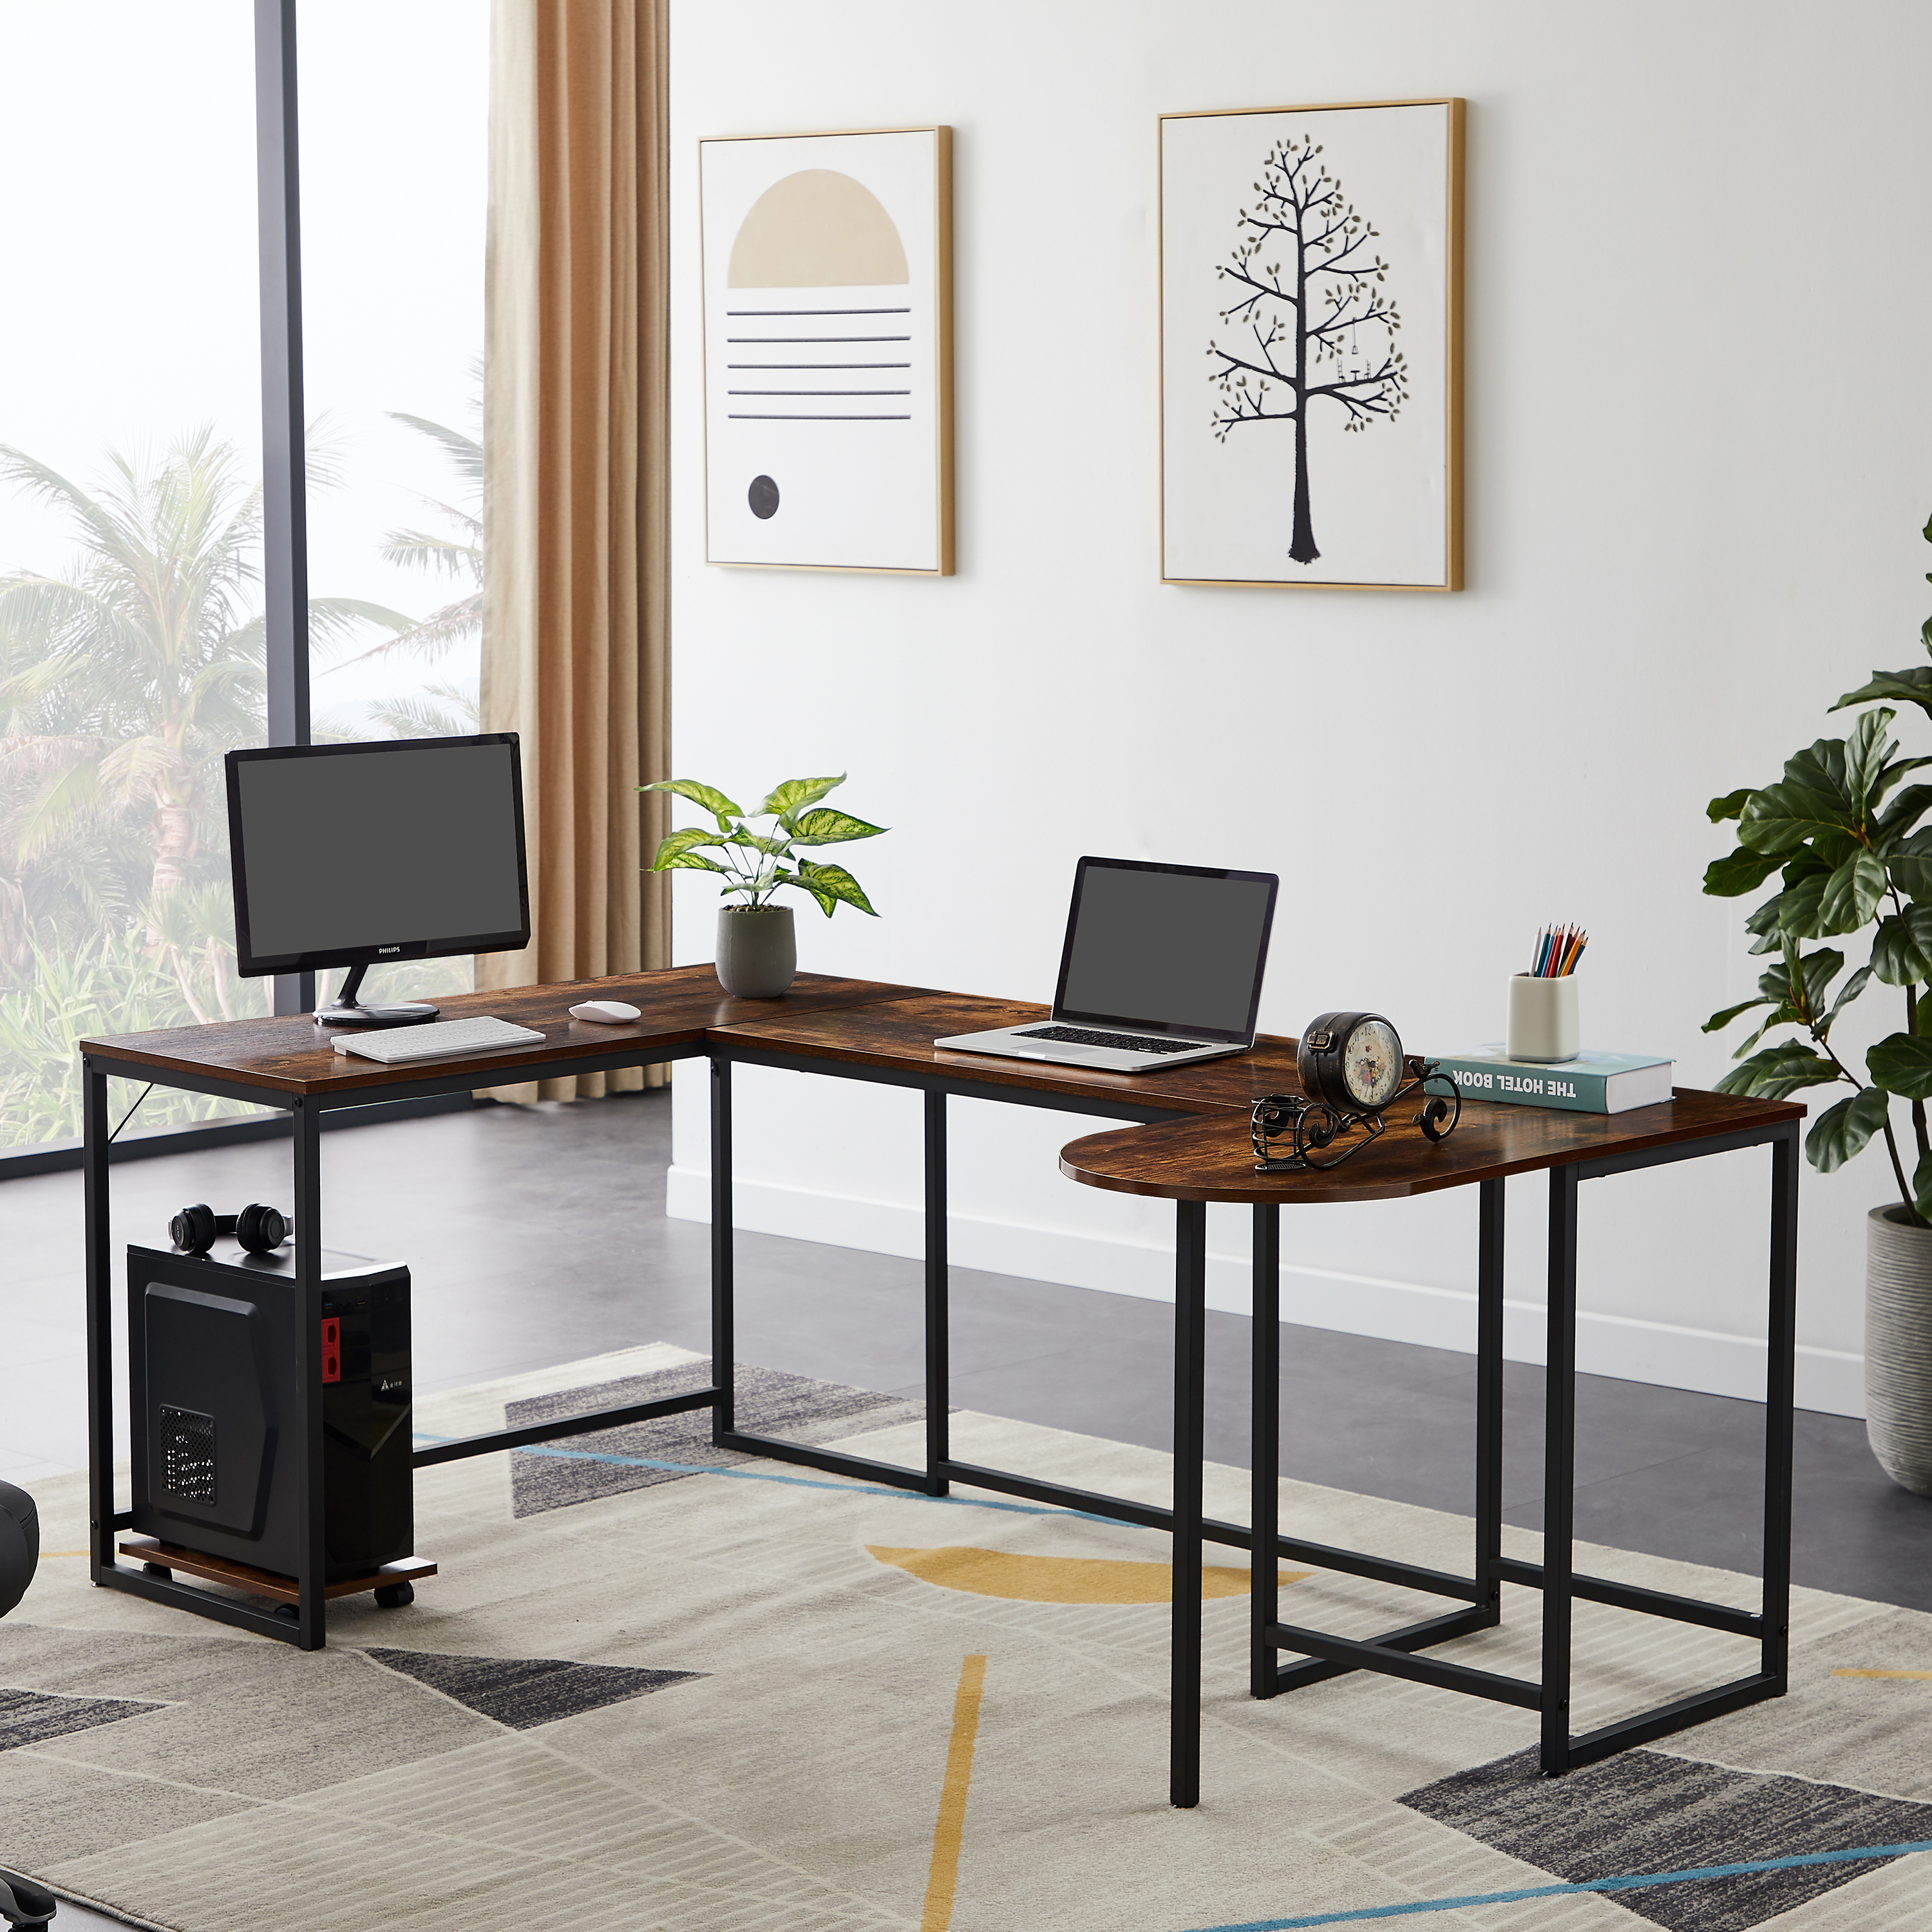 Details about   Modern Computer Desk PC Workstation Table Home Office Writing Table w/Shelves 